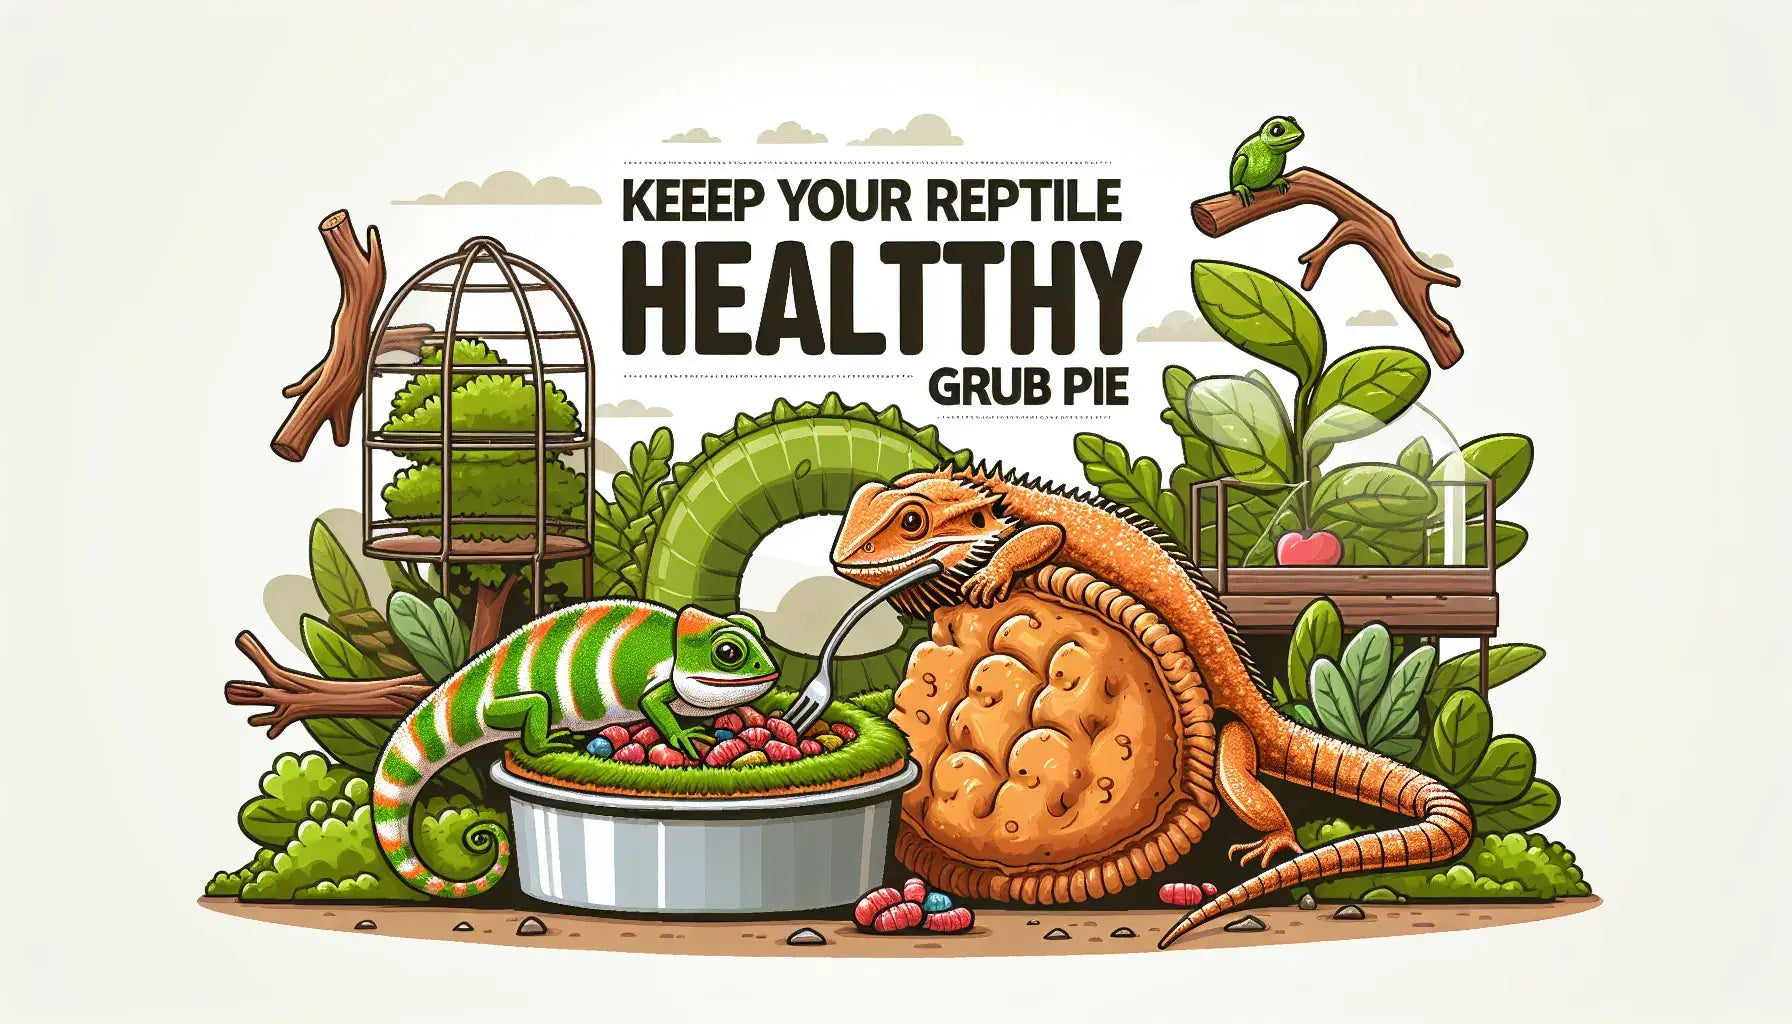 Keep Your Reptile Healthy with Repashy Grub Pie